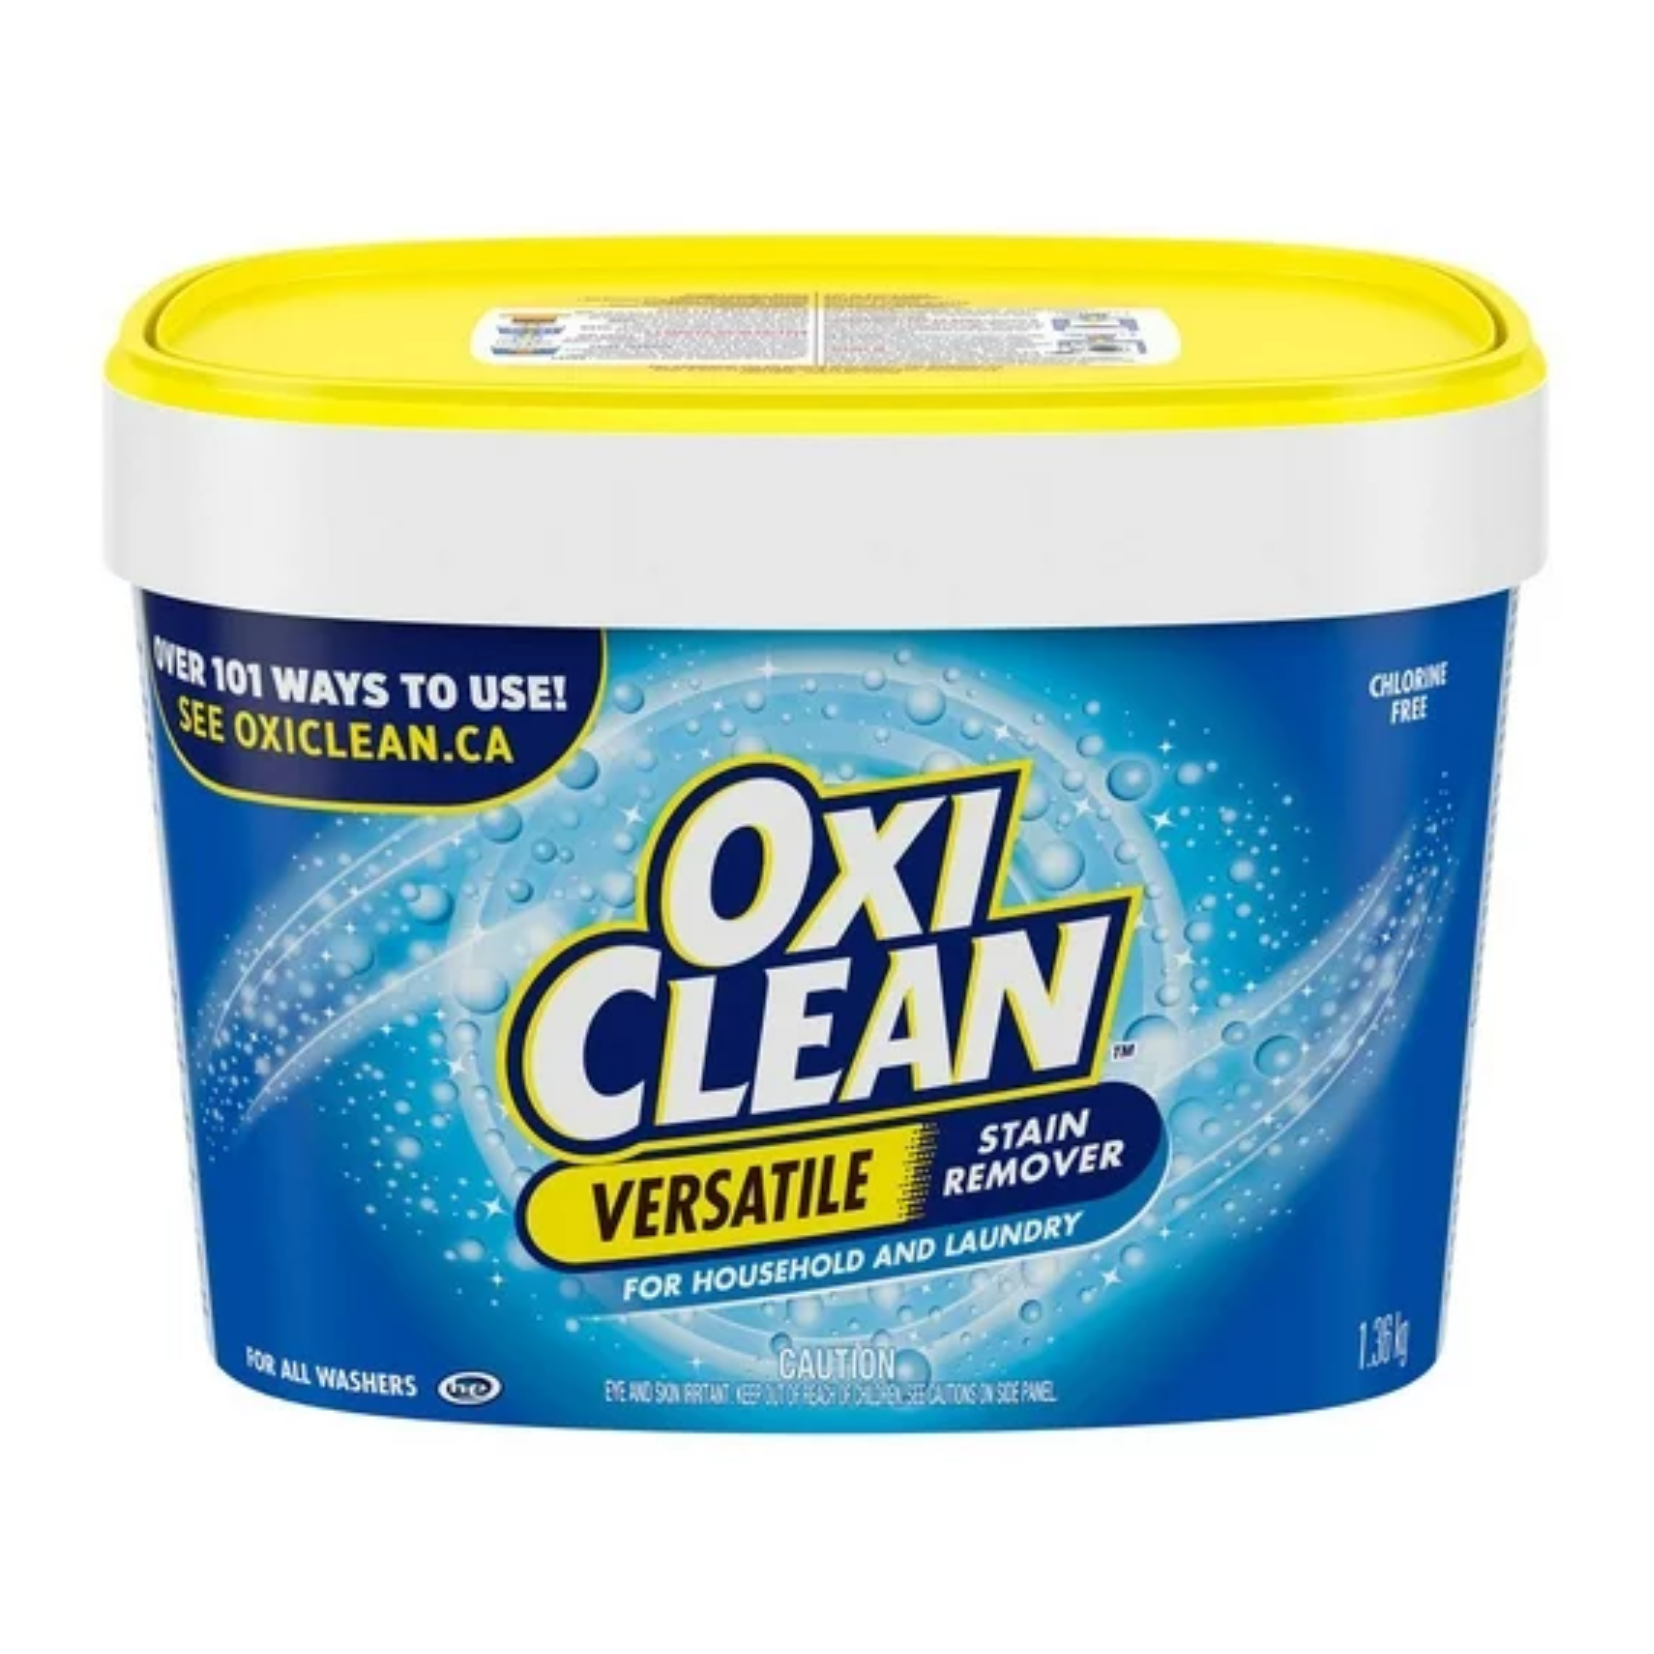 Oxi Clean Stain Remover 1.36kg